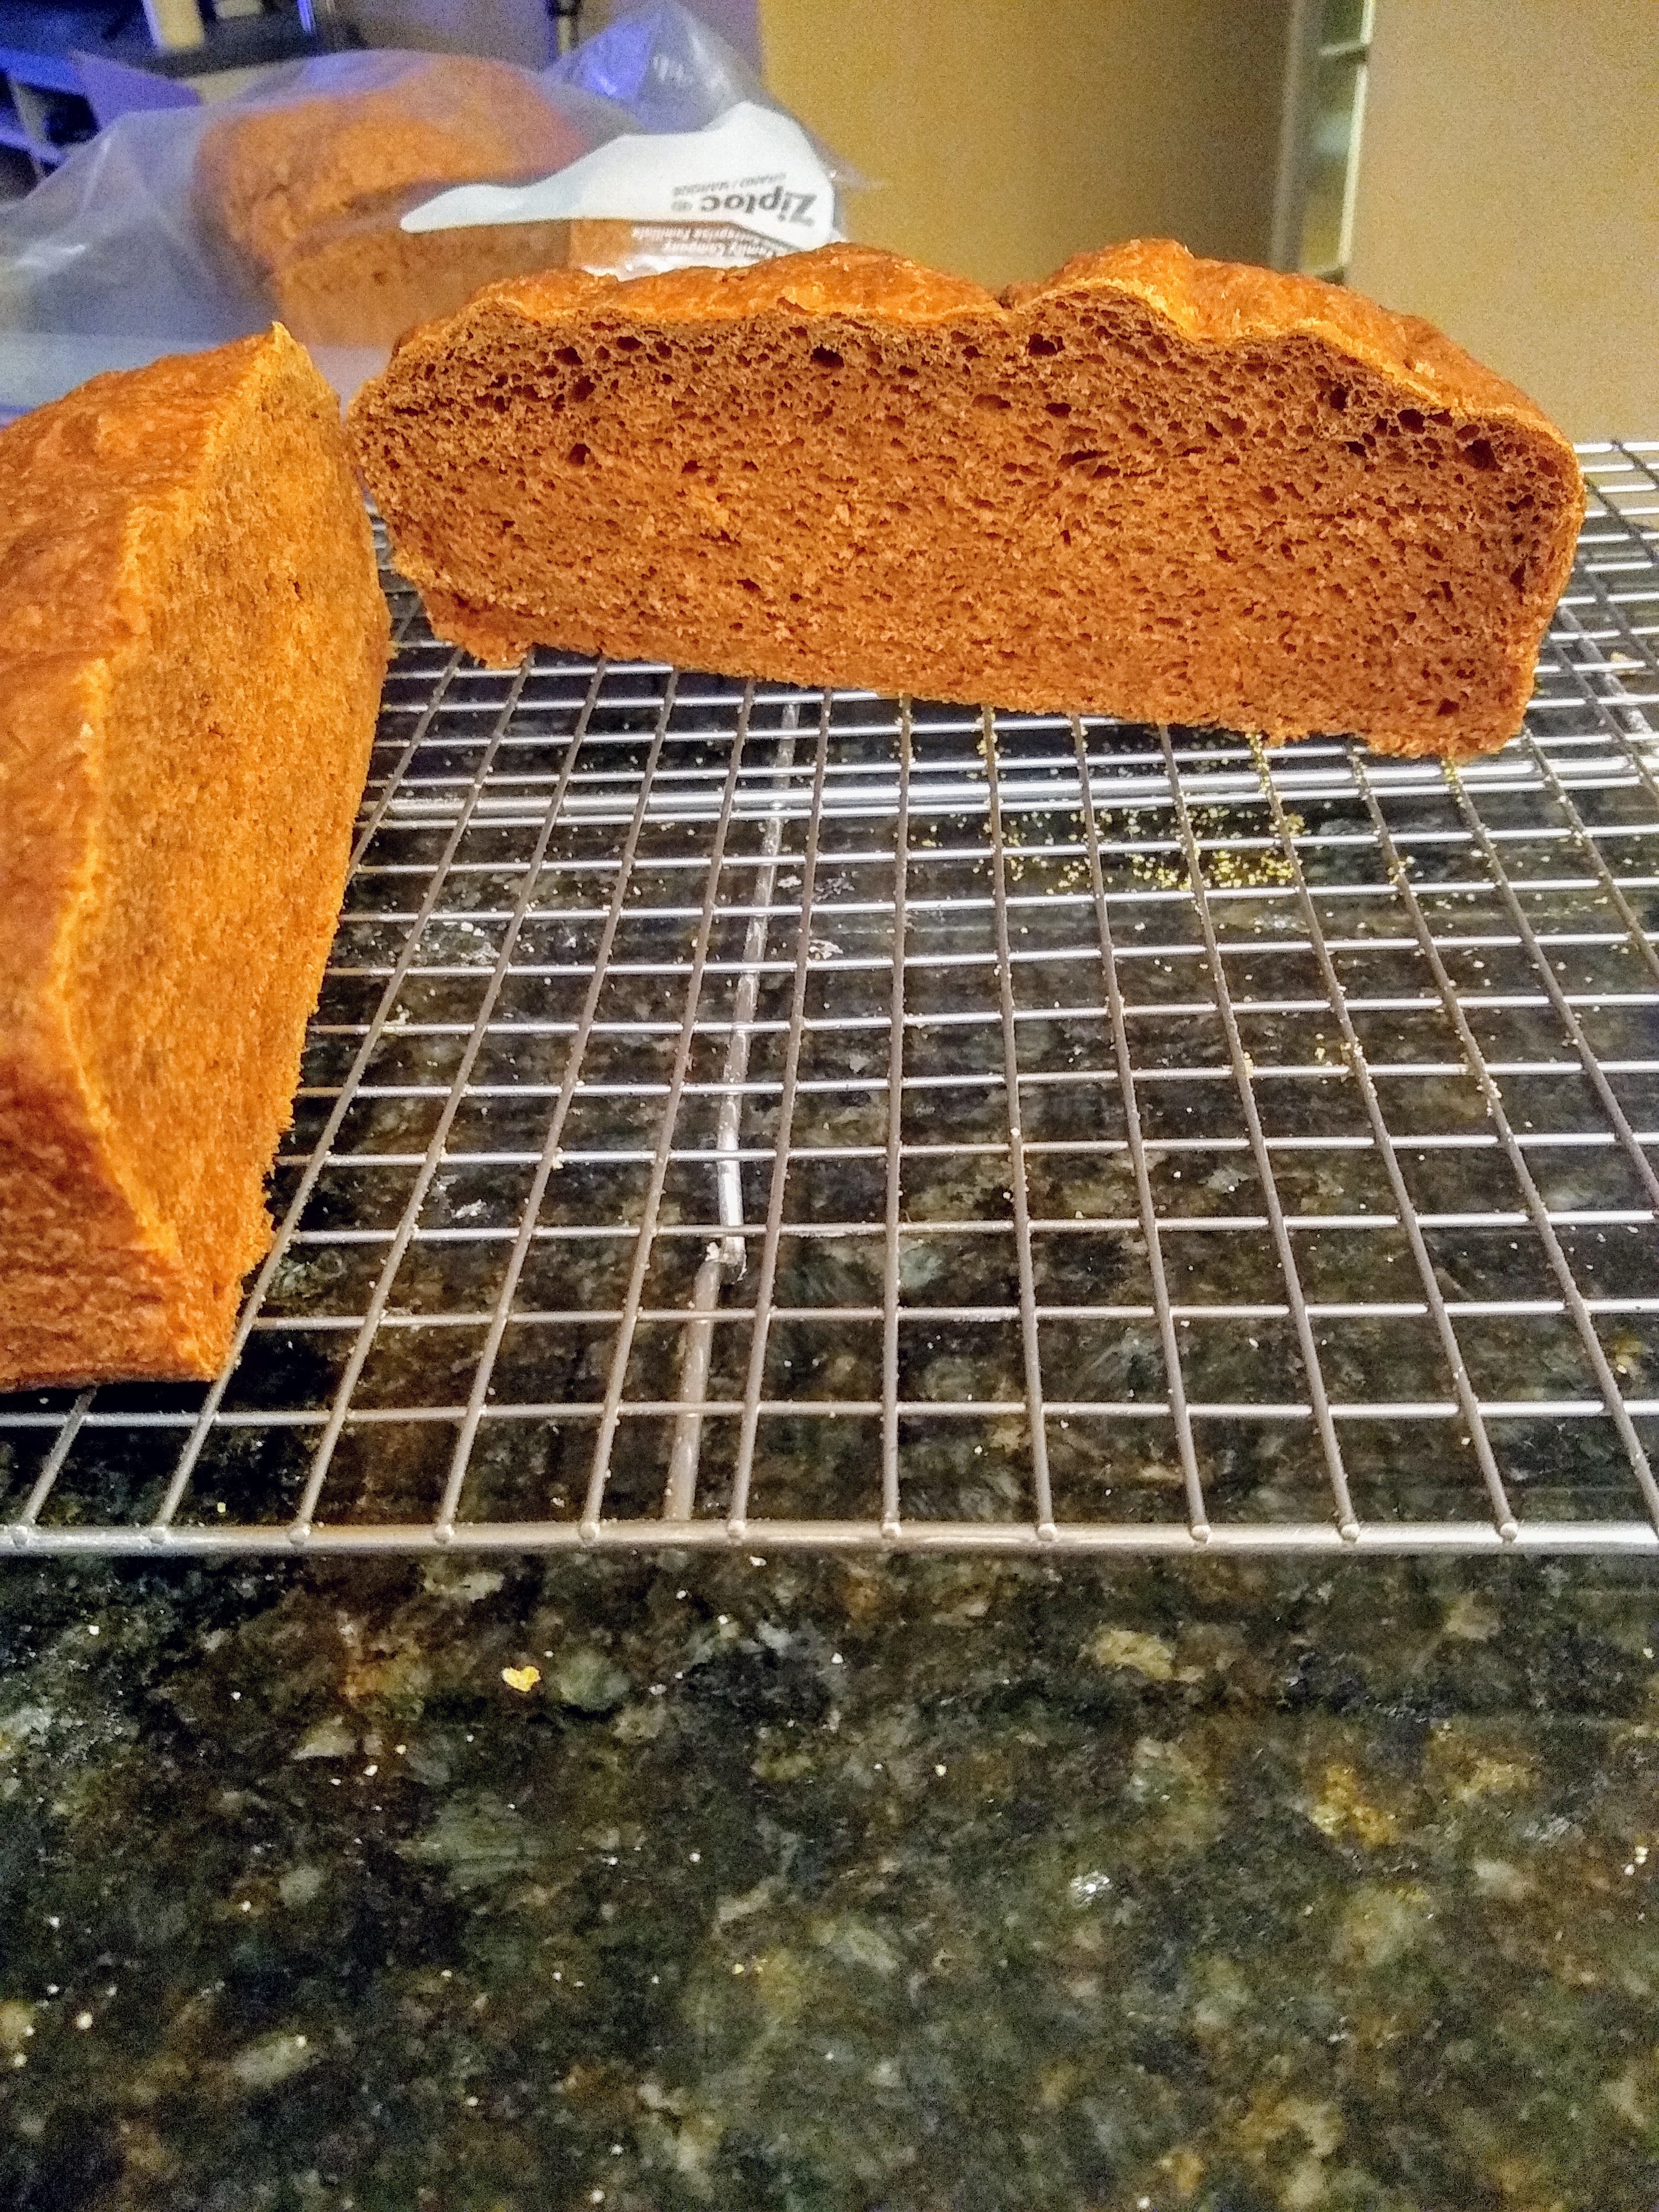 Cross-section of pumpernickel loaf showing the dense crumb at the bottom.